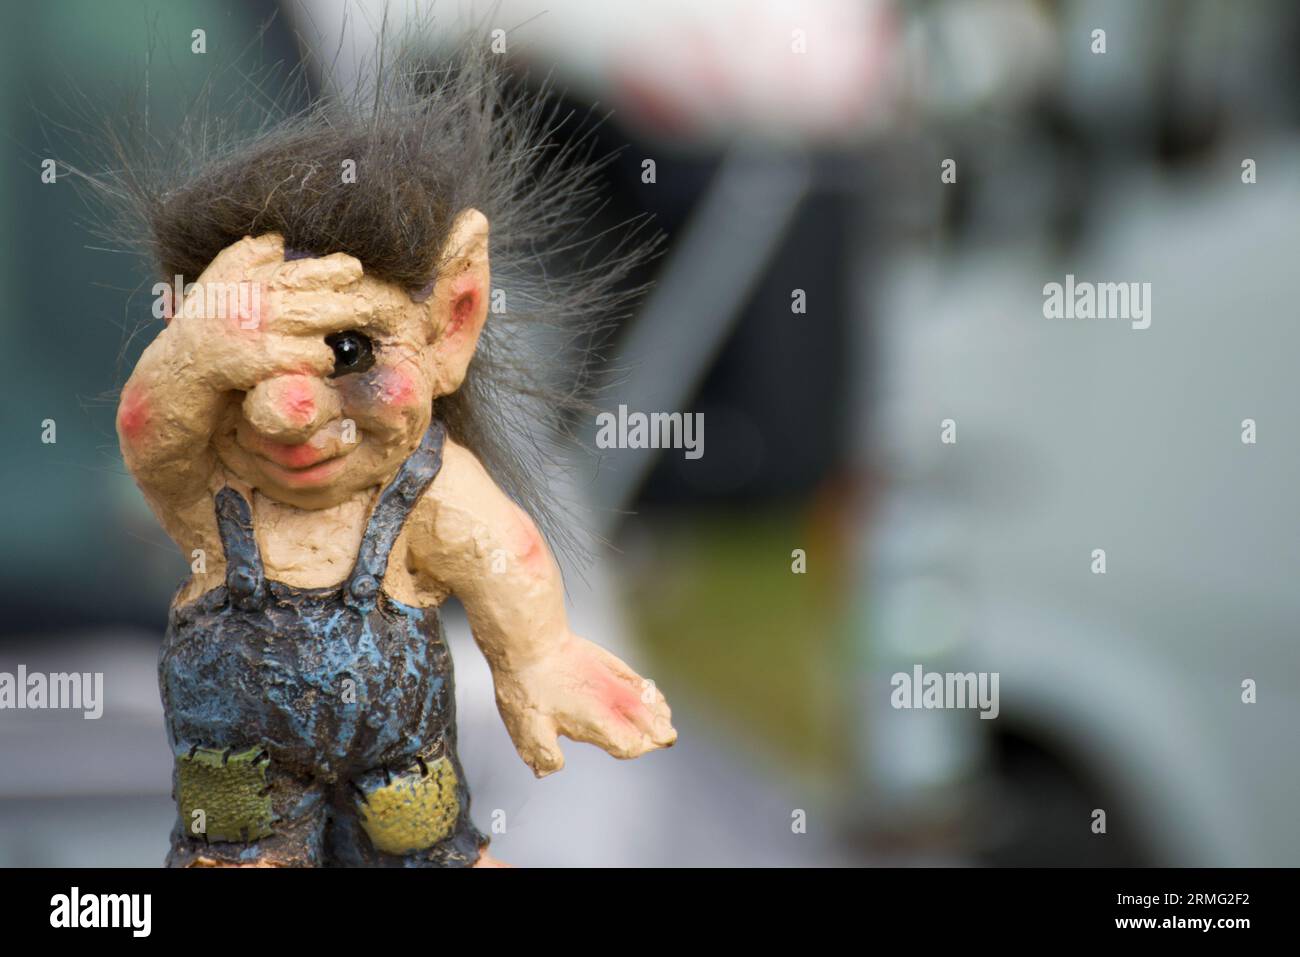 A small Norwegian troll covering his eyes. Trolls are famous creatures in Scandinavian myth. Very detailed image with copyspace. Stock Photo